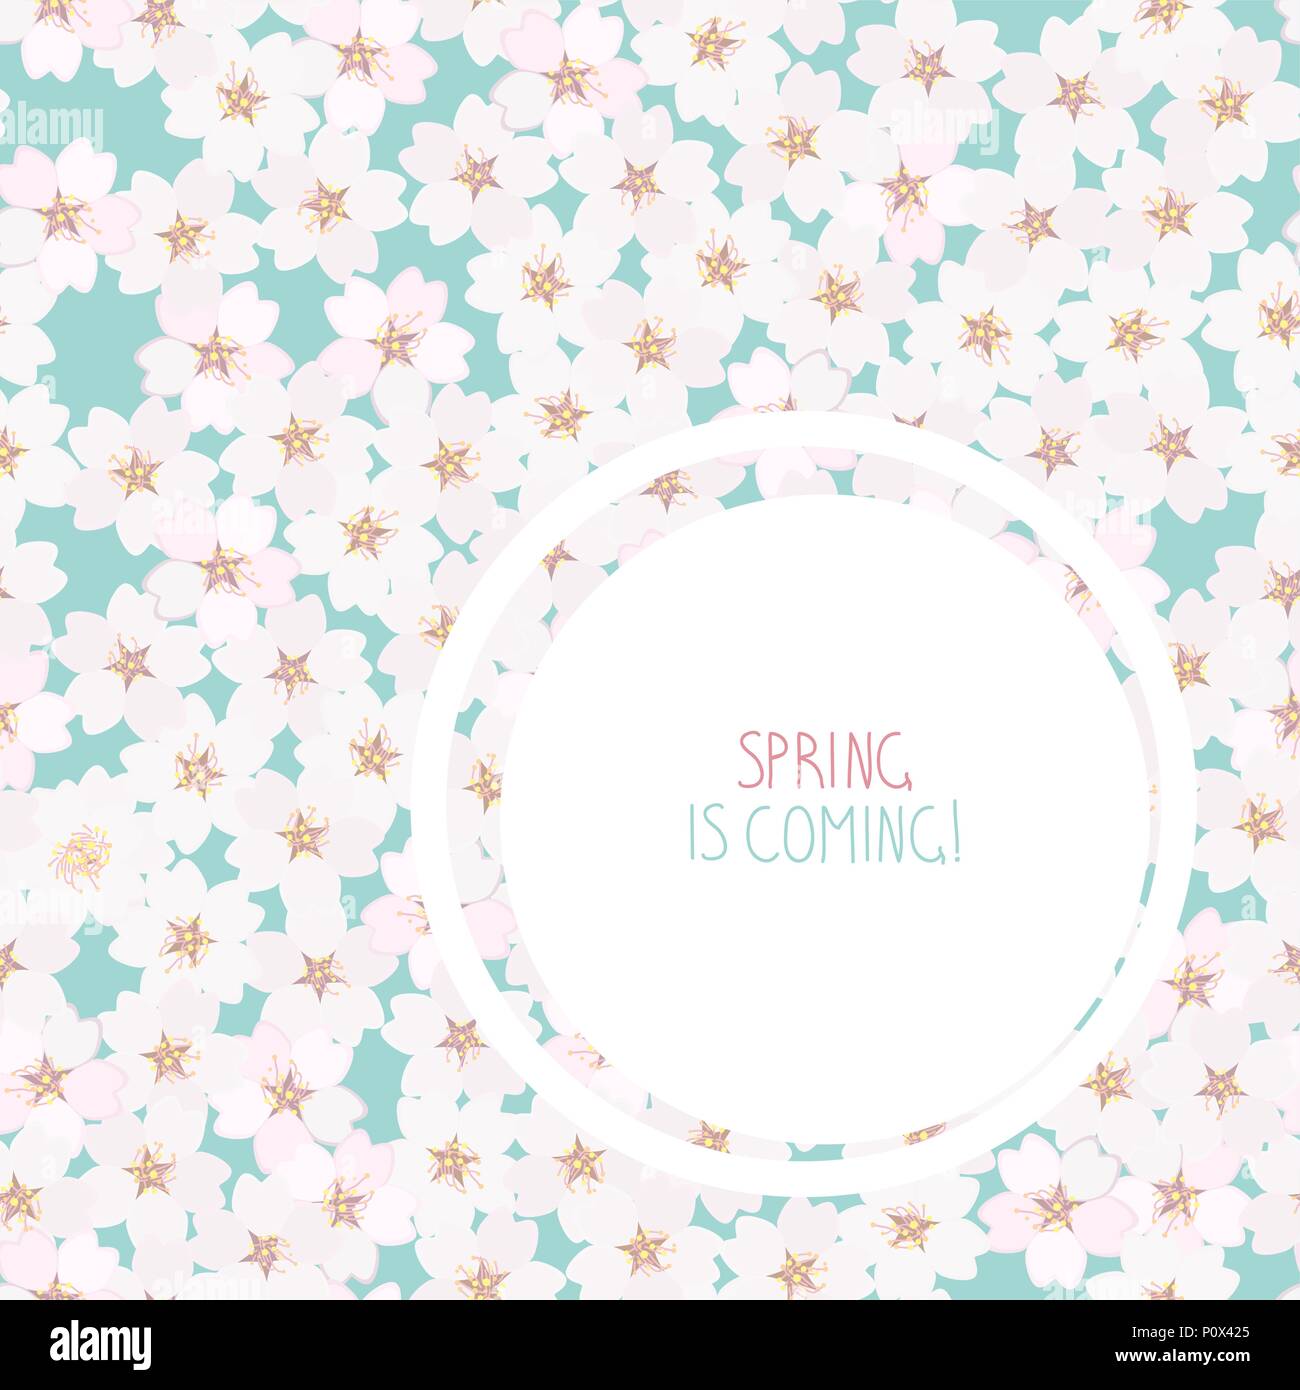 'Spring is coming!' postcard. Cherry blossom. Sakura flowers. Endless floral background with copy space. Hanami. Japanese Culture. Cherry blossom view Stock Vector